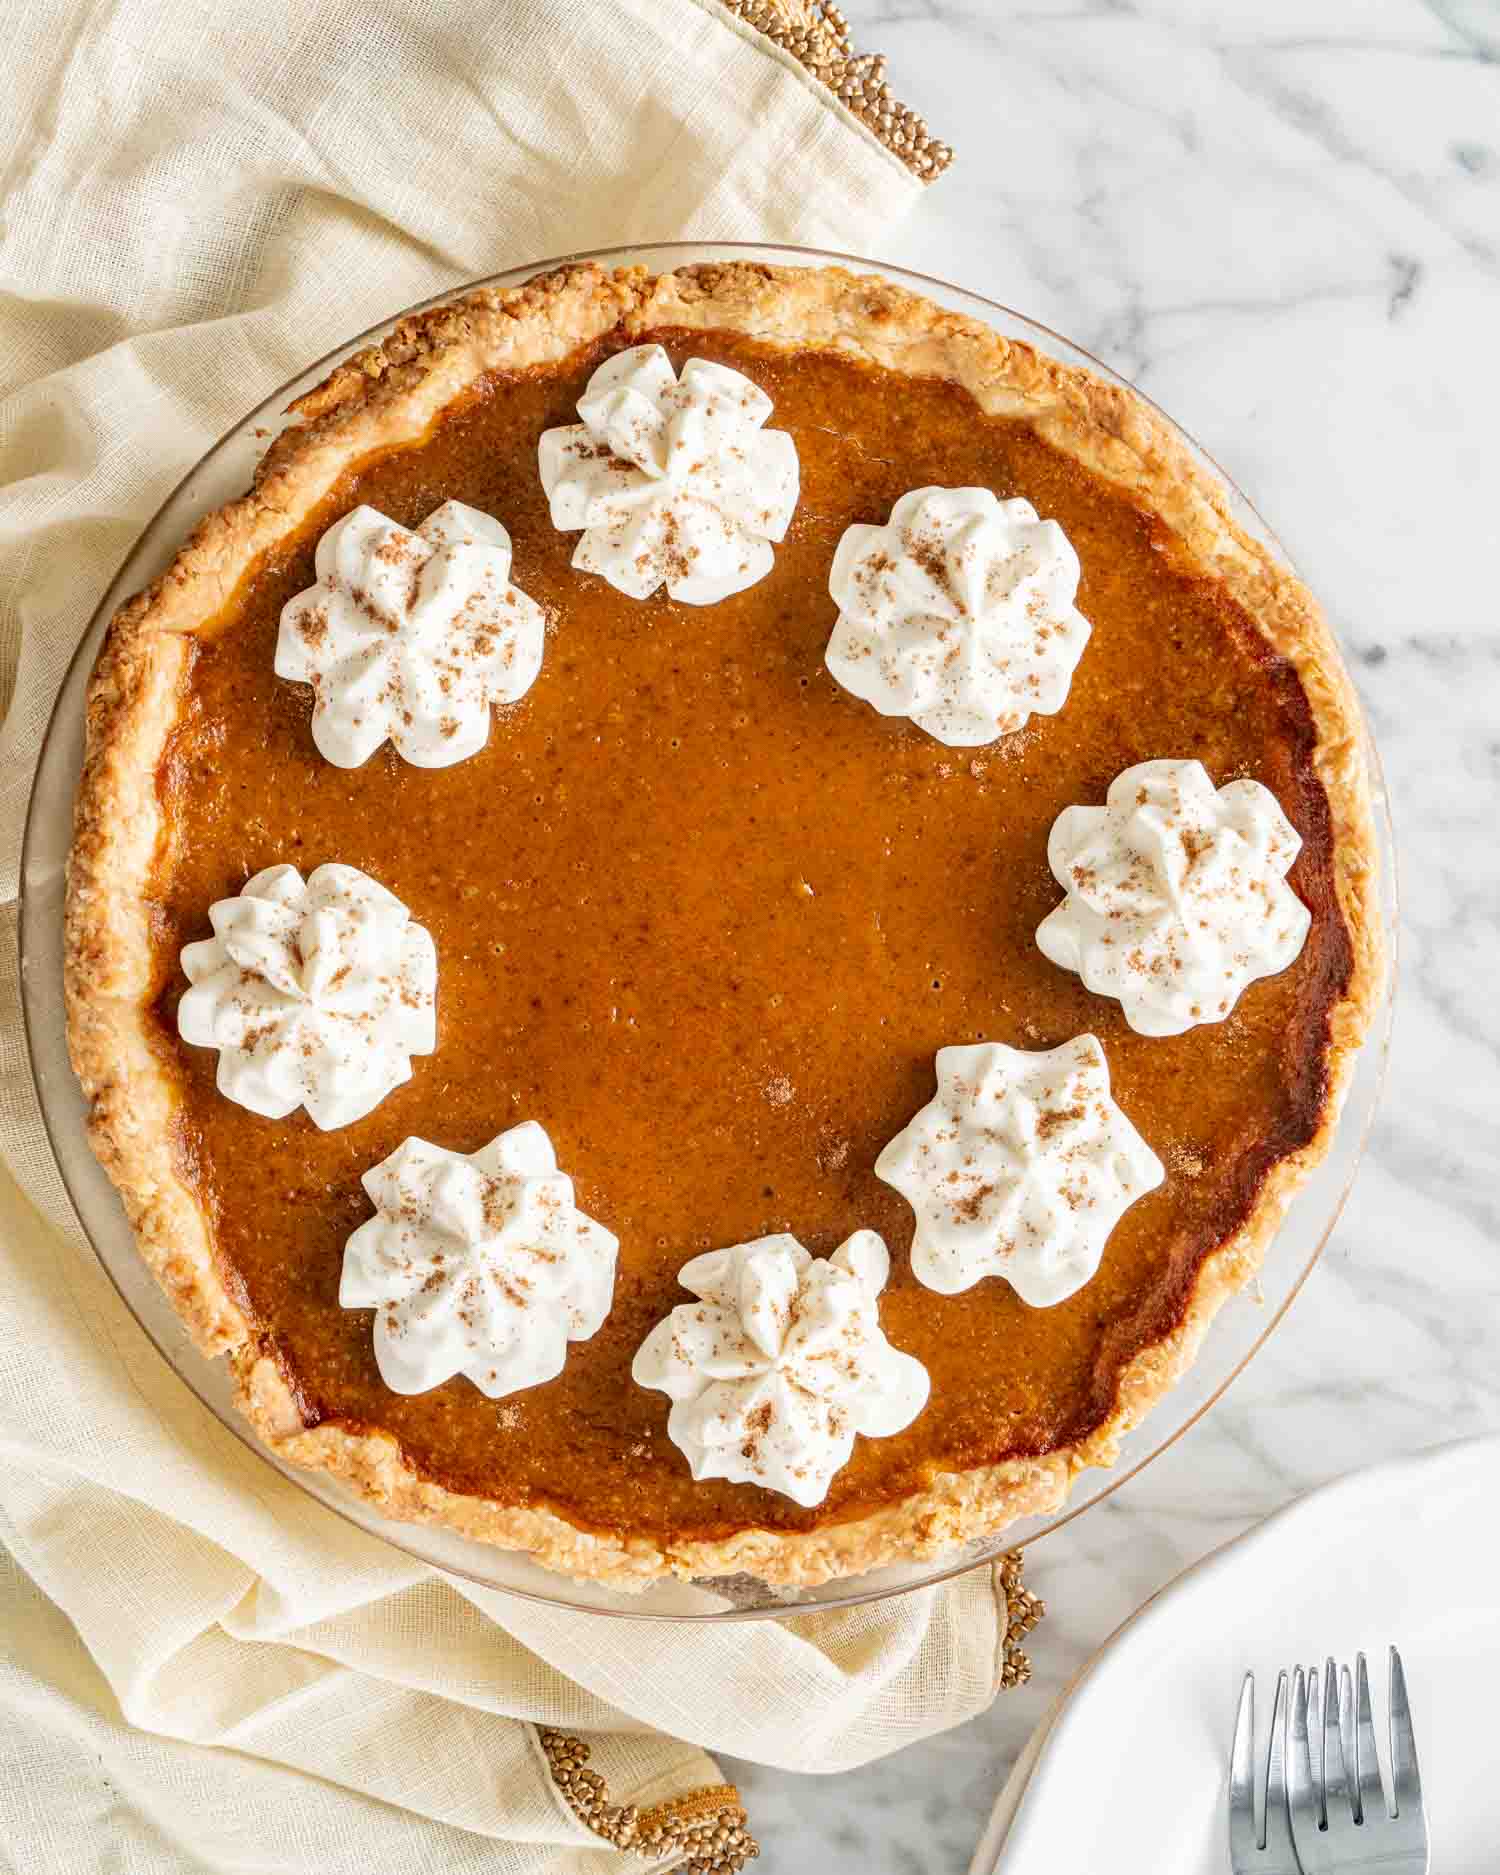 a freshly baked pumpkin pie with whipped cream.